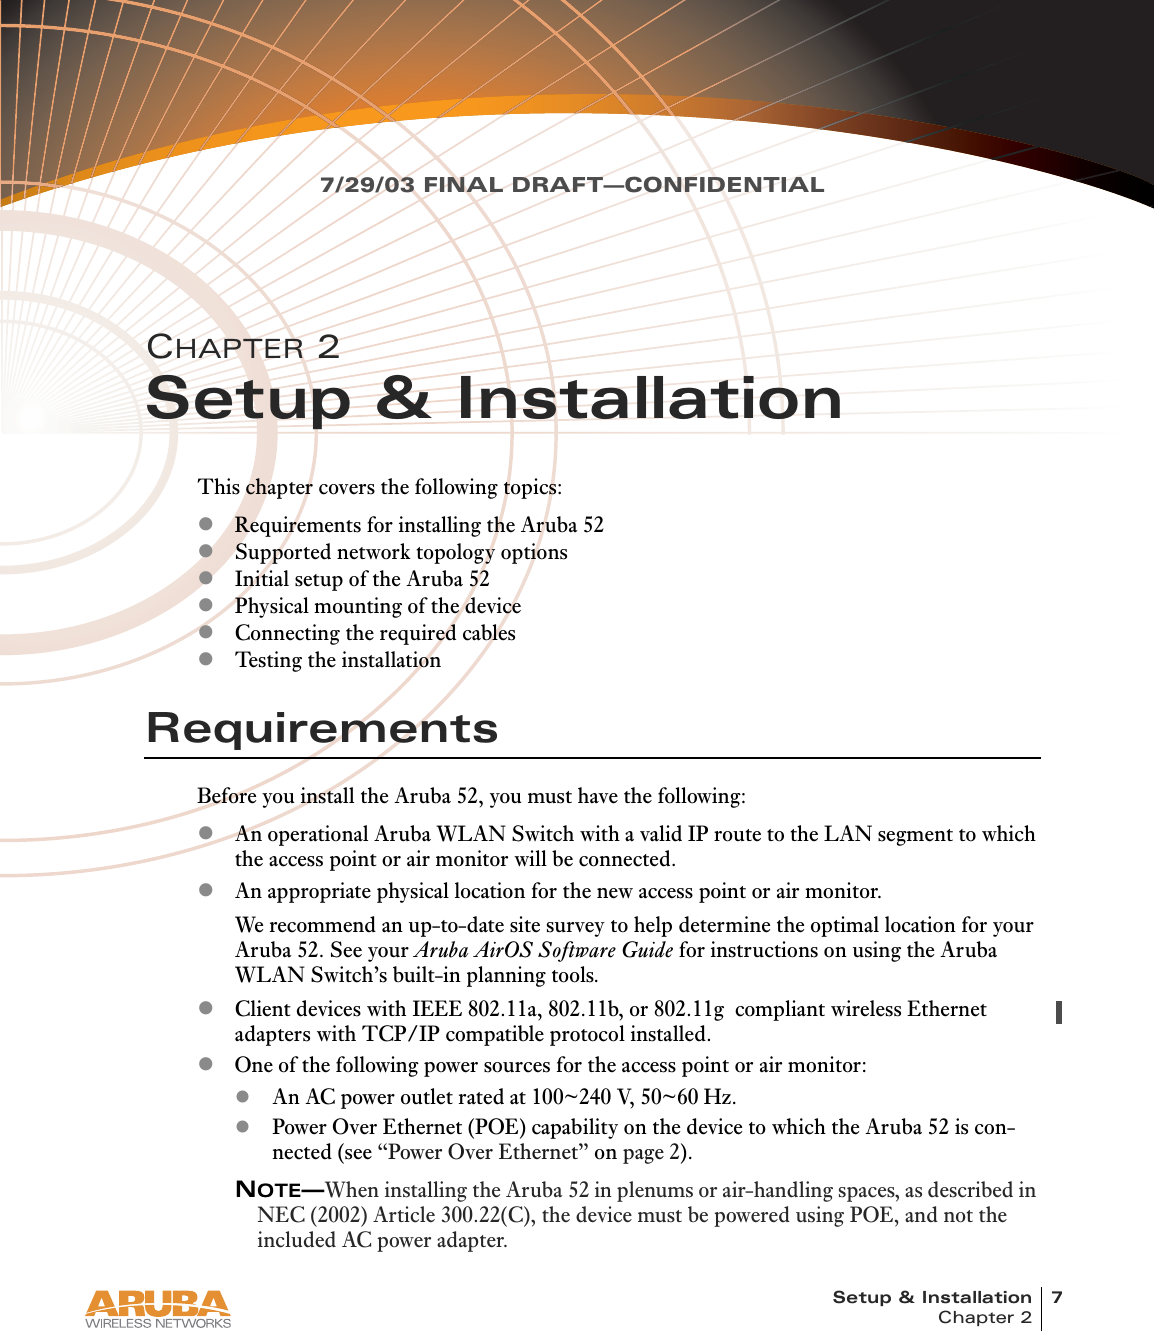 Setup &amp; Installation 7Chapter 27/29/03 FINAL DRAFT—CONFIDENTIALCHAPTER 2Setup &amp; InstallationThis chapter covers the following topics:zRequirements for installing the Aruba 52zSupported network topology optionszInitial setup of the Aruba 52zPhysical mounting of the devicezConnecting the required cableszTesting the installationRequirementsBefore you install the Aruba 52, you must have the following:zAn operational Aruba WLAN Switch with a valid IP route to the LAN segment to which the access point or air monitor will be connected.zAn appropriate physical location for the new access point or air monitor.We recommend an up-to-date site survey to help determine the optimal location for your Aruba 52. See your Aruba AirOS Software Guide for instructions on using the Aruba WLAN Switch’s built-in planning tools.zClient devices with IEEE 802.11a, 802.11b, or 802.11g  compliant wireless Ethernet adapters with TCP/IP compatible protocol installed.zOne of the following power sources for the access point or air monitor:zAn AC power outlet rated at 100~240 V, 50~60 Hz.zPower Over Ethernet (POE) capability on the device to which the Aruba 52 is con-nected (see “Power Over Ethernet” on page 2).NOTE—When installing the Aruba 52 in plenums or air-handling spaces, as described in NEC (2002) Article 300.22(C), the device must be powered using POE, and not the included AC power adapter.